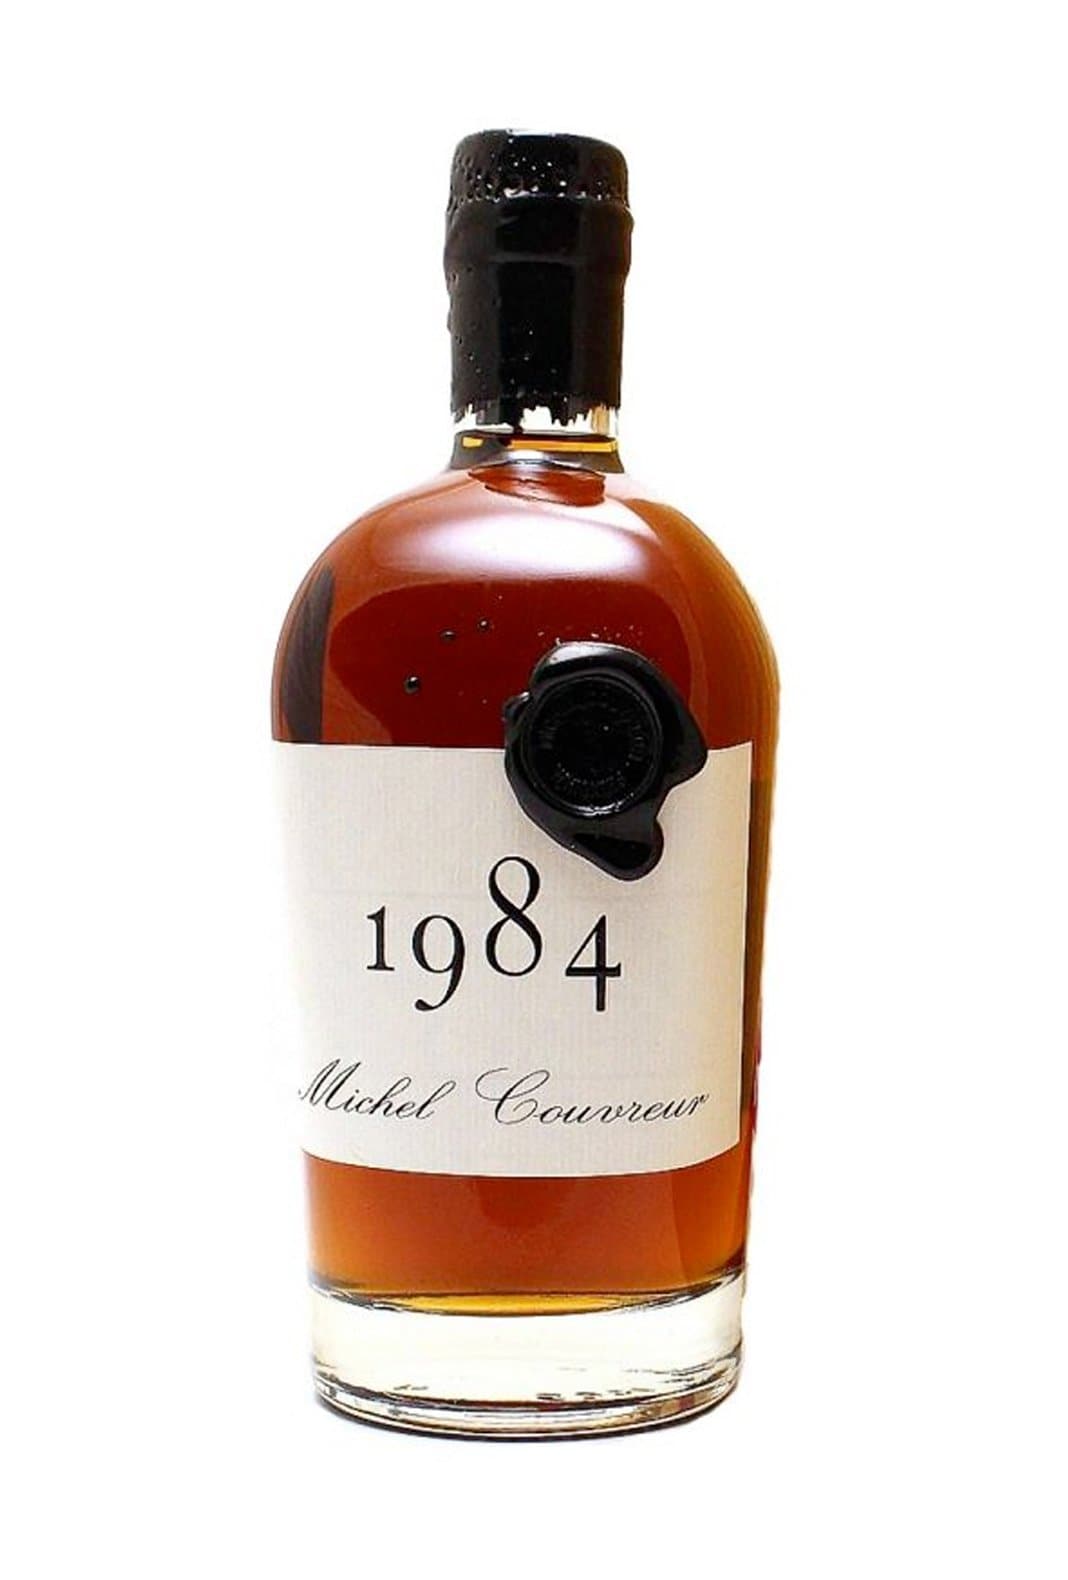 Michel Couvreur Whisky Single Malt 1984 45% 500ml | Whiskey | Shop online at Spirits of France